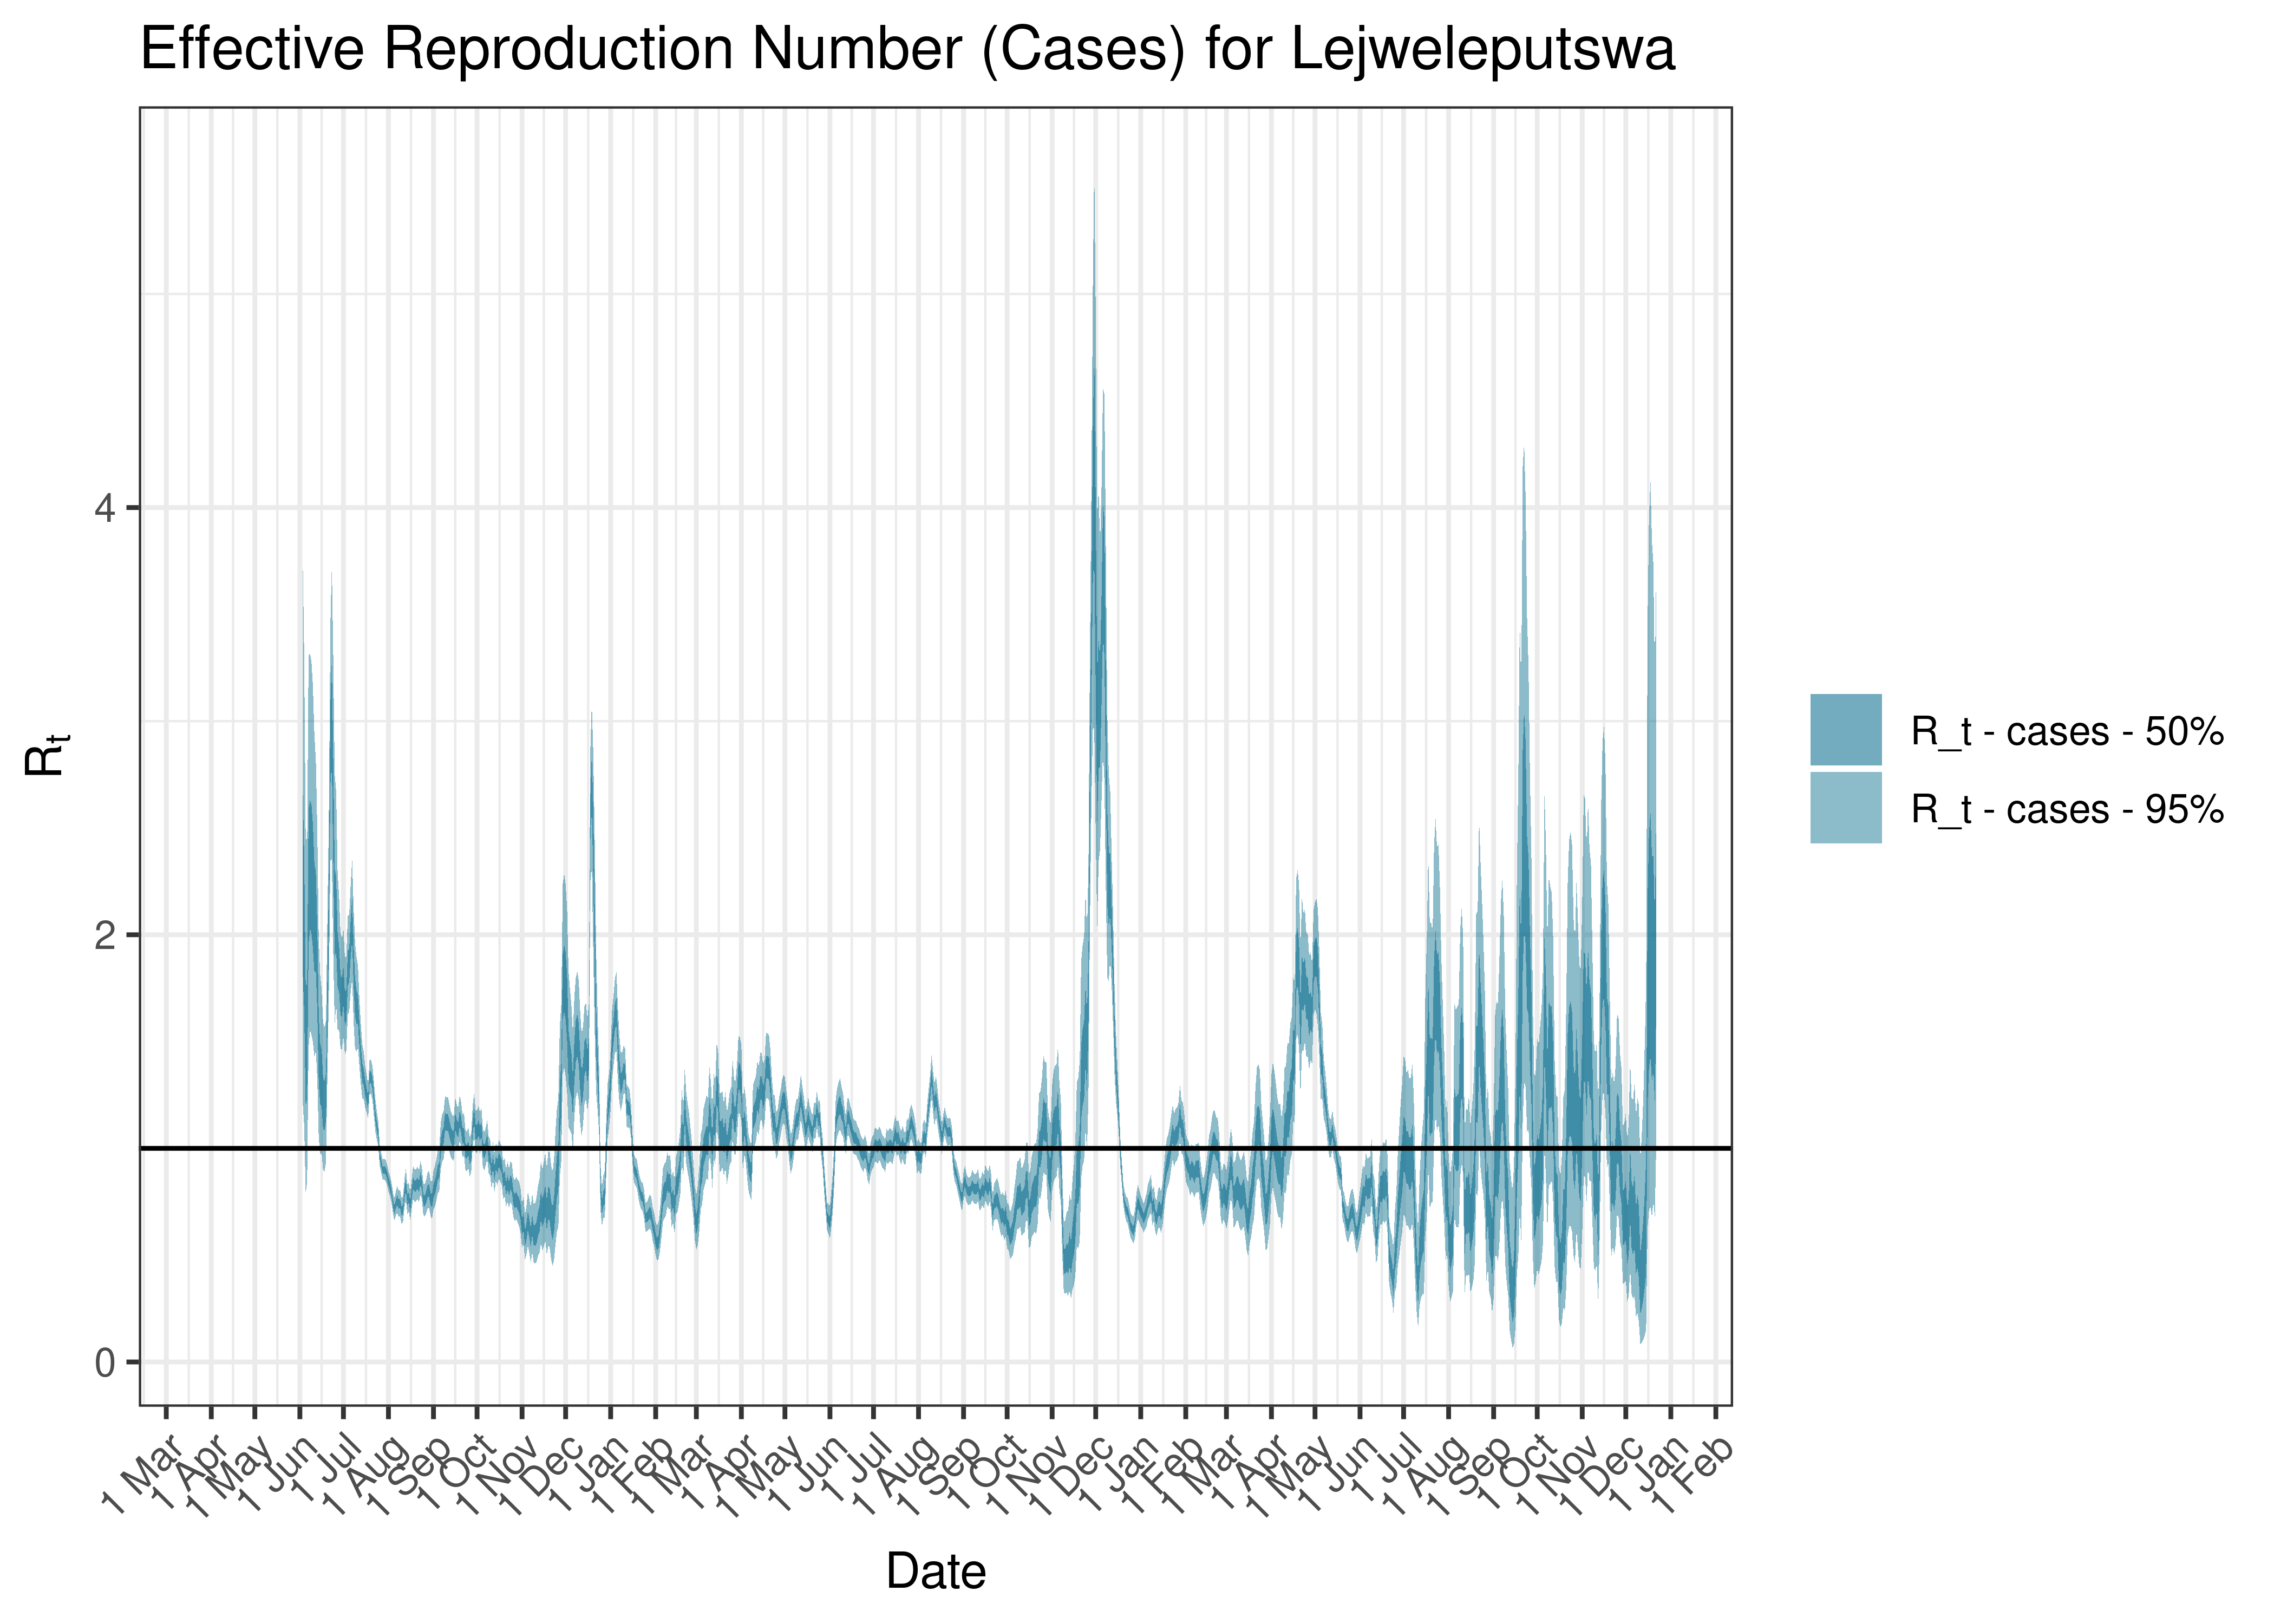 Estimated Effective Reproduction Number Based on Cases for Lejweleputswa since 1 April 2020